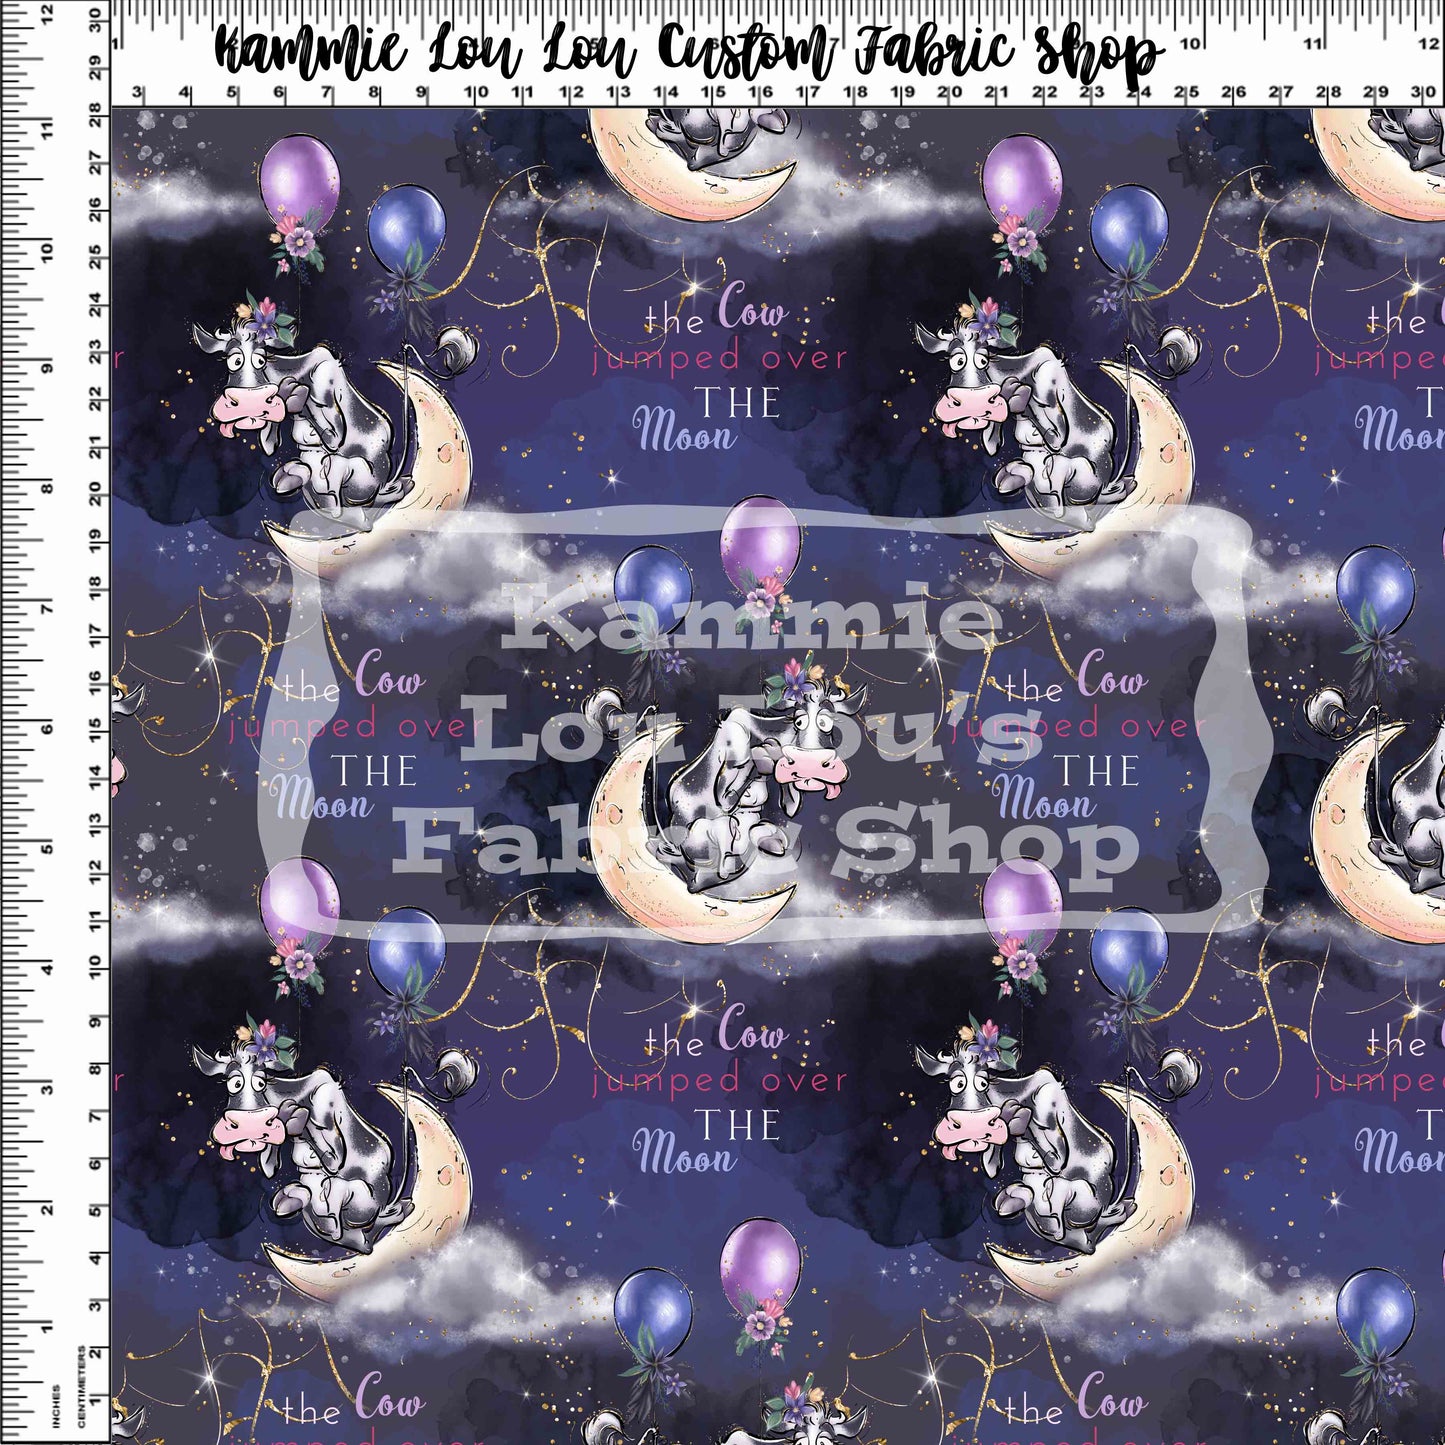 R125 Pre-Order Nursery Rhymes - Cow Jumped Over the Moon